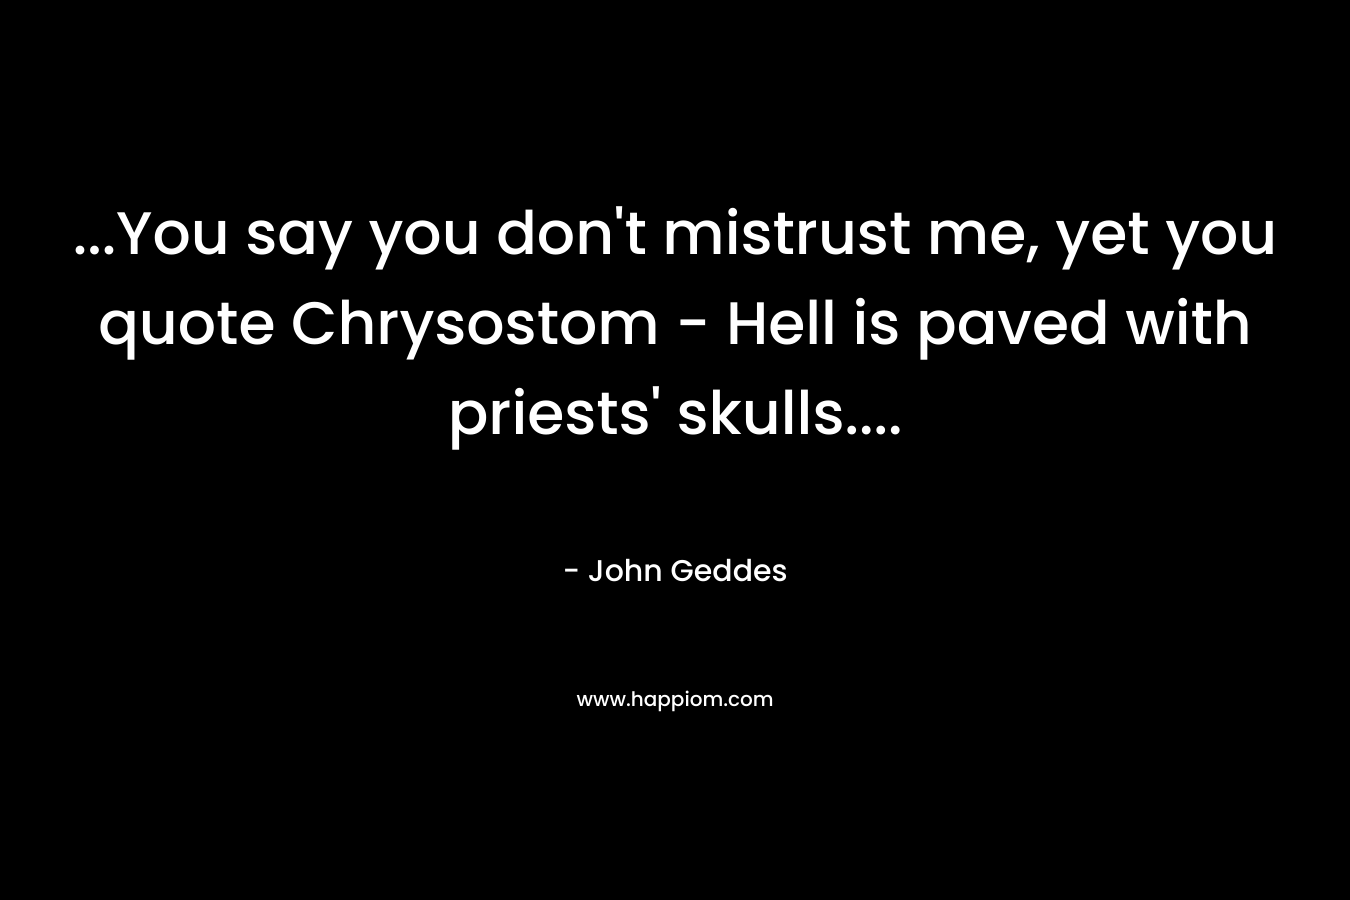 ...You say you don't mistrust me, yet you quote Chrysostom - Hell is paved with priests' skulls....